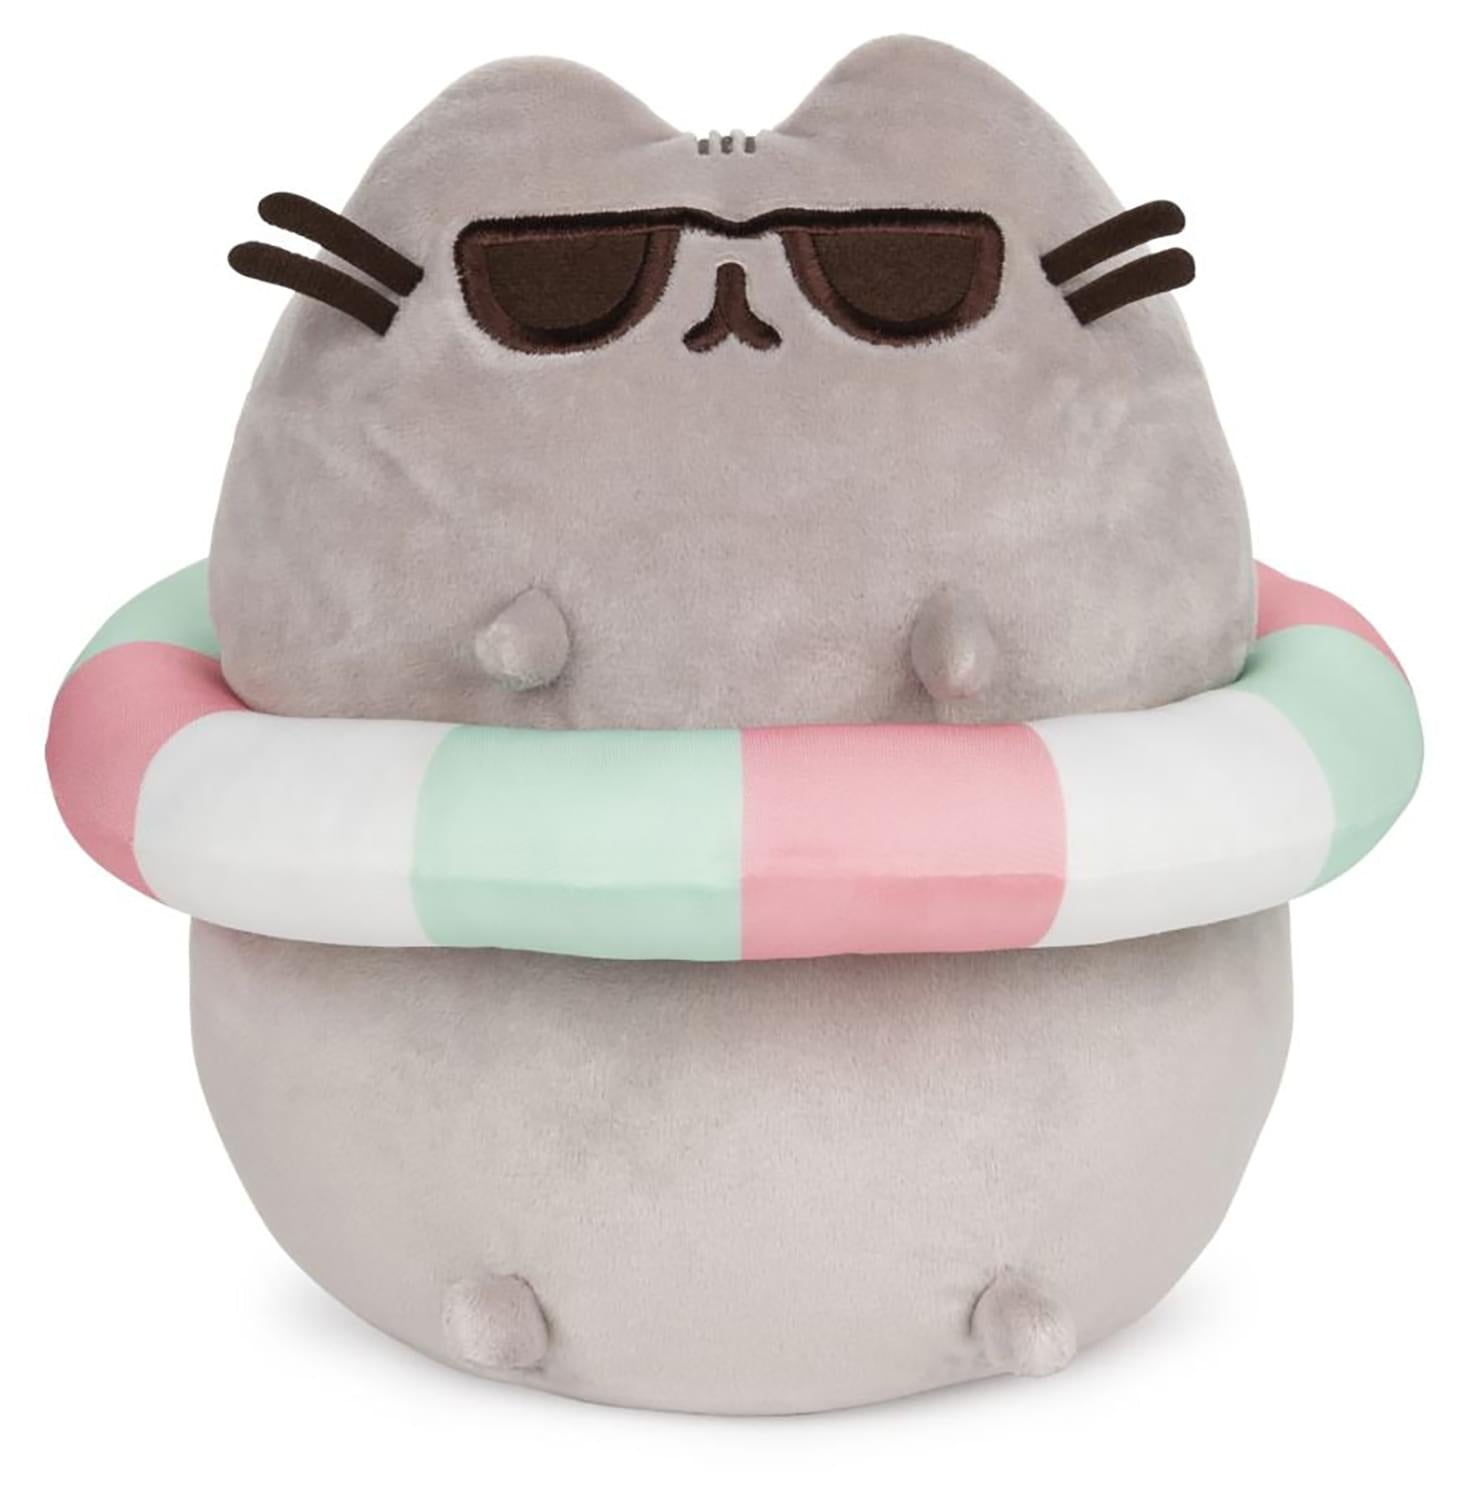 Pusheen in Striped Tube and Sunglasses 9.5 Inch Plush